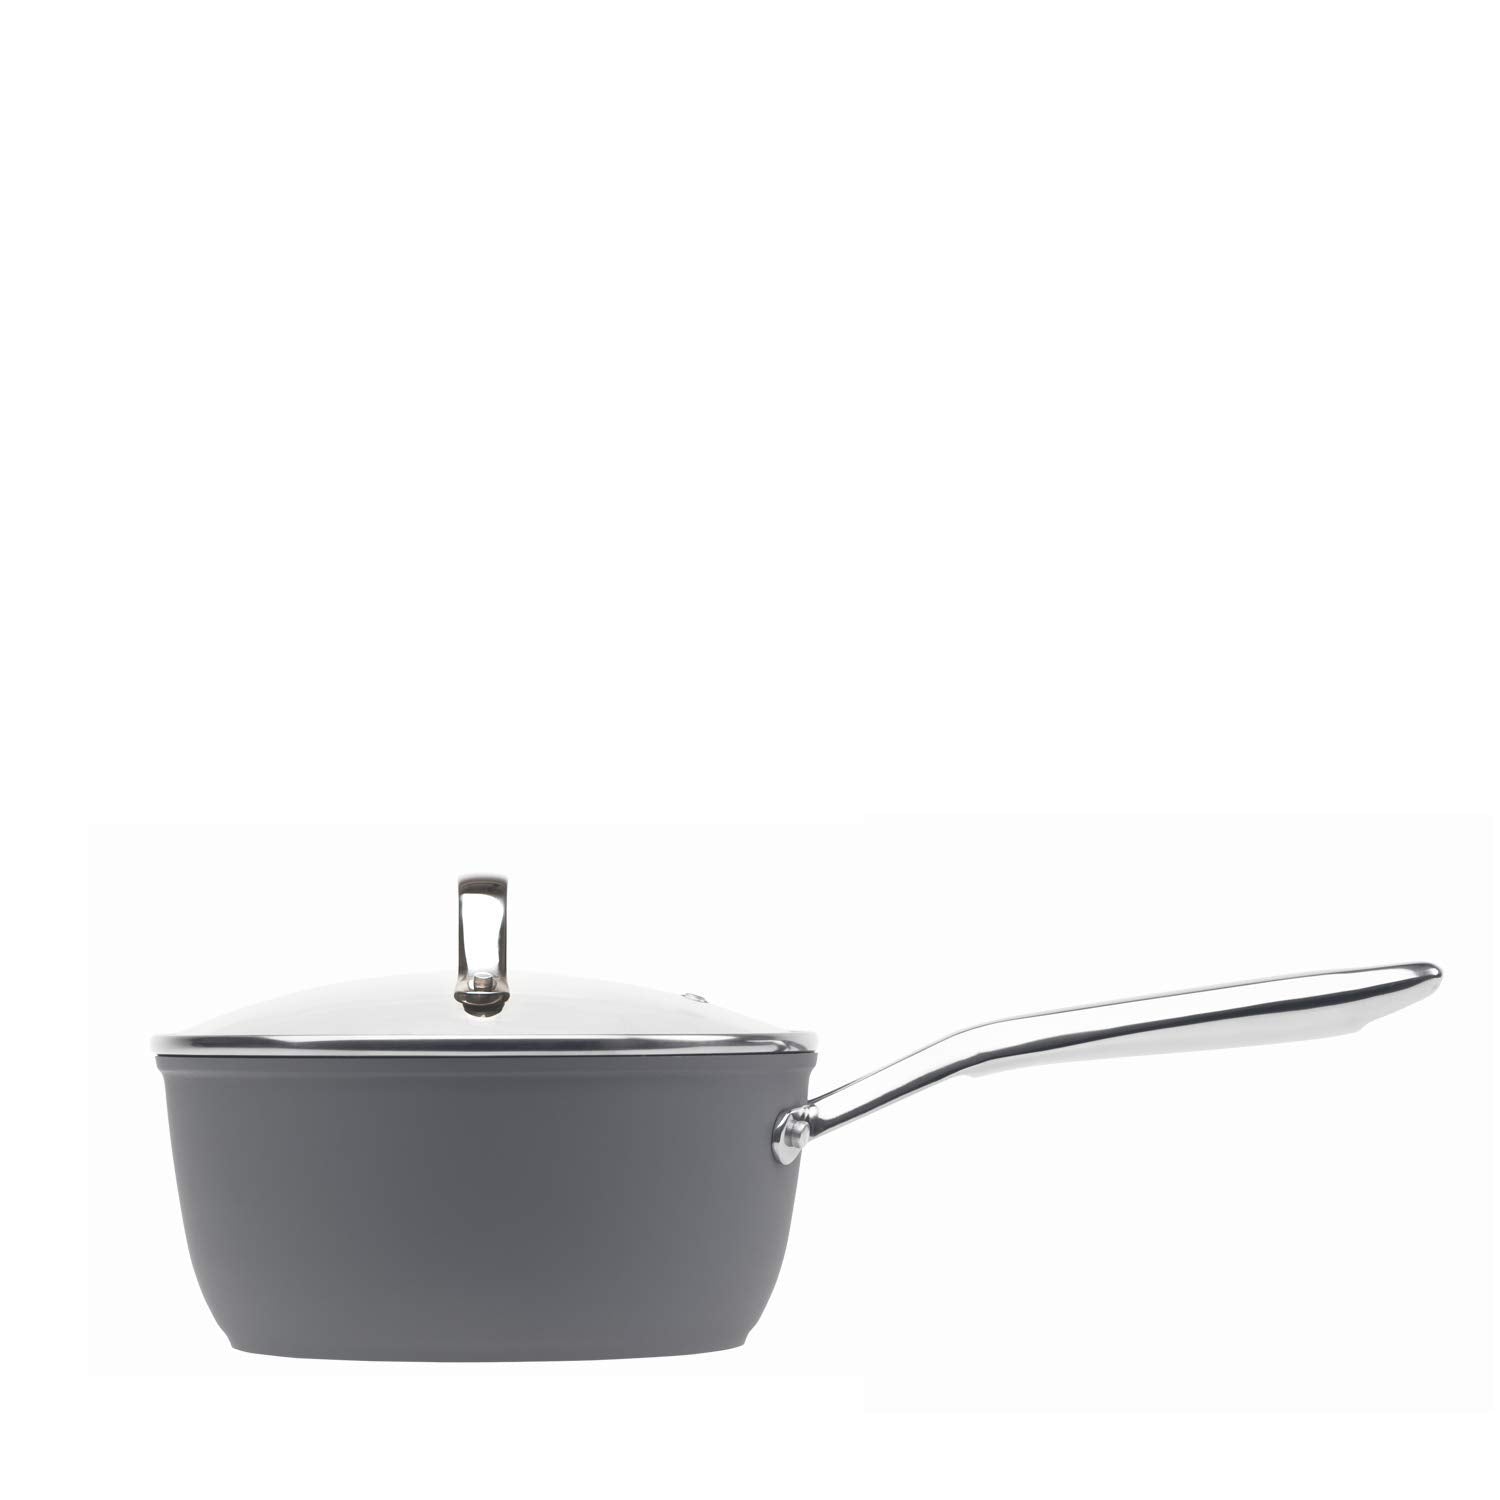 Haden Perth Saucepan (18cm)  with Solid and Comfortable Grip - pengessentials